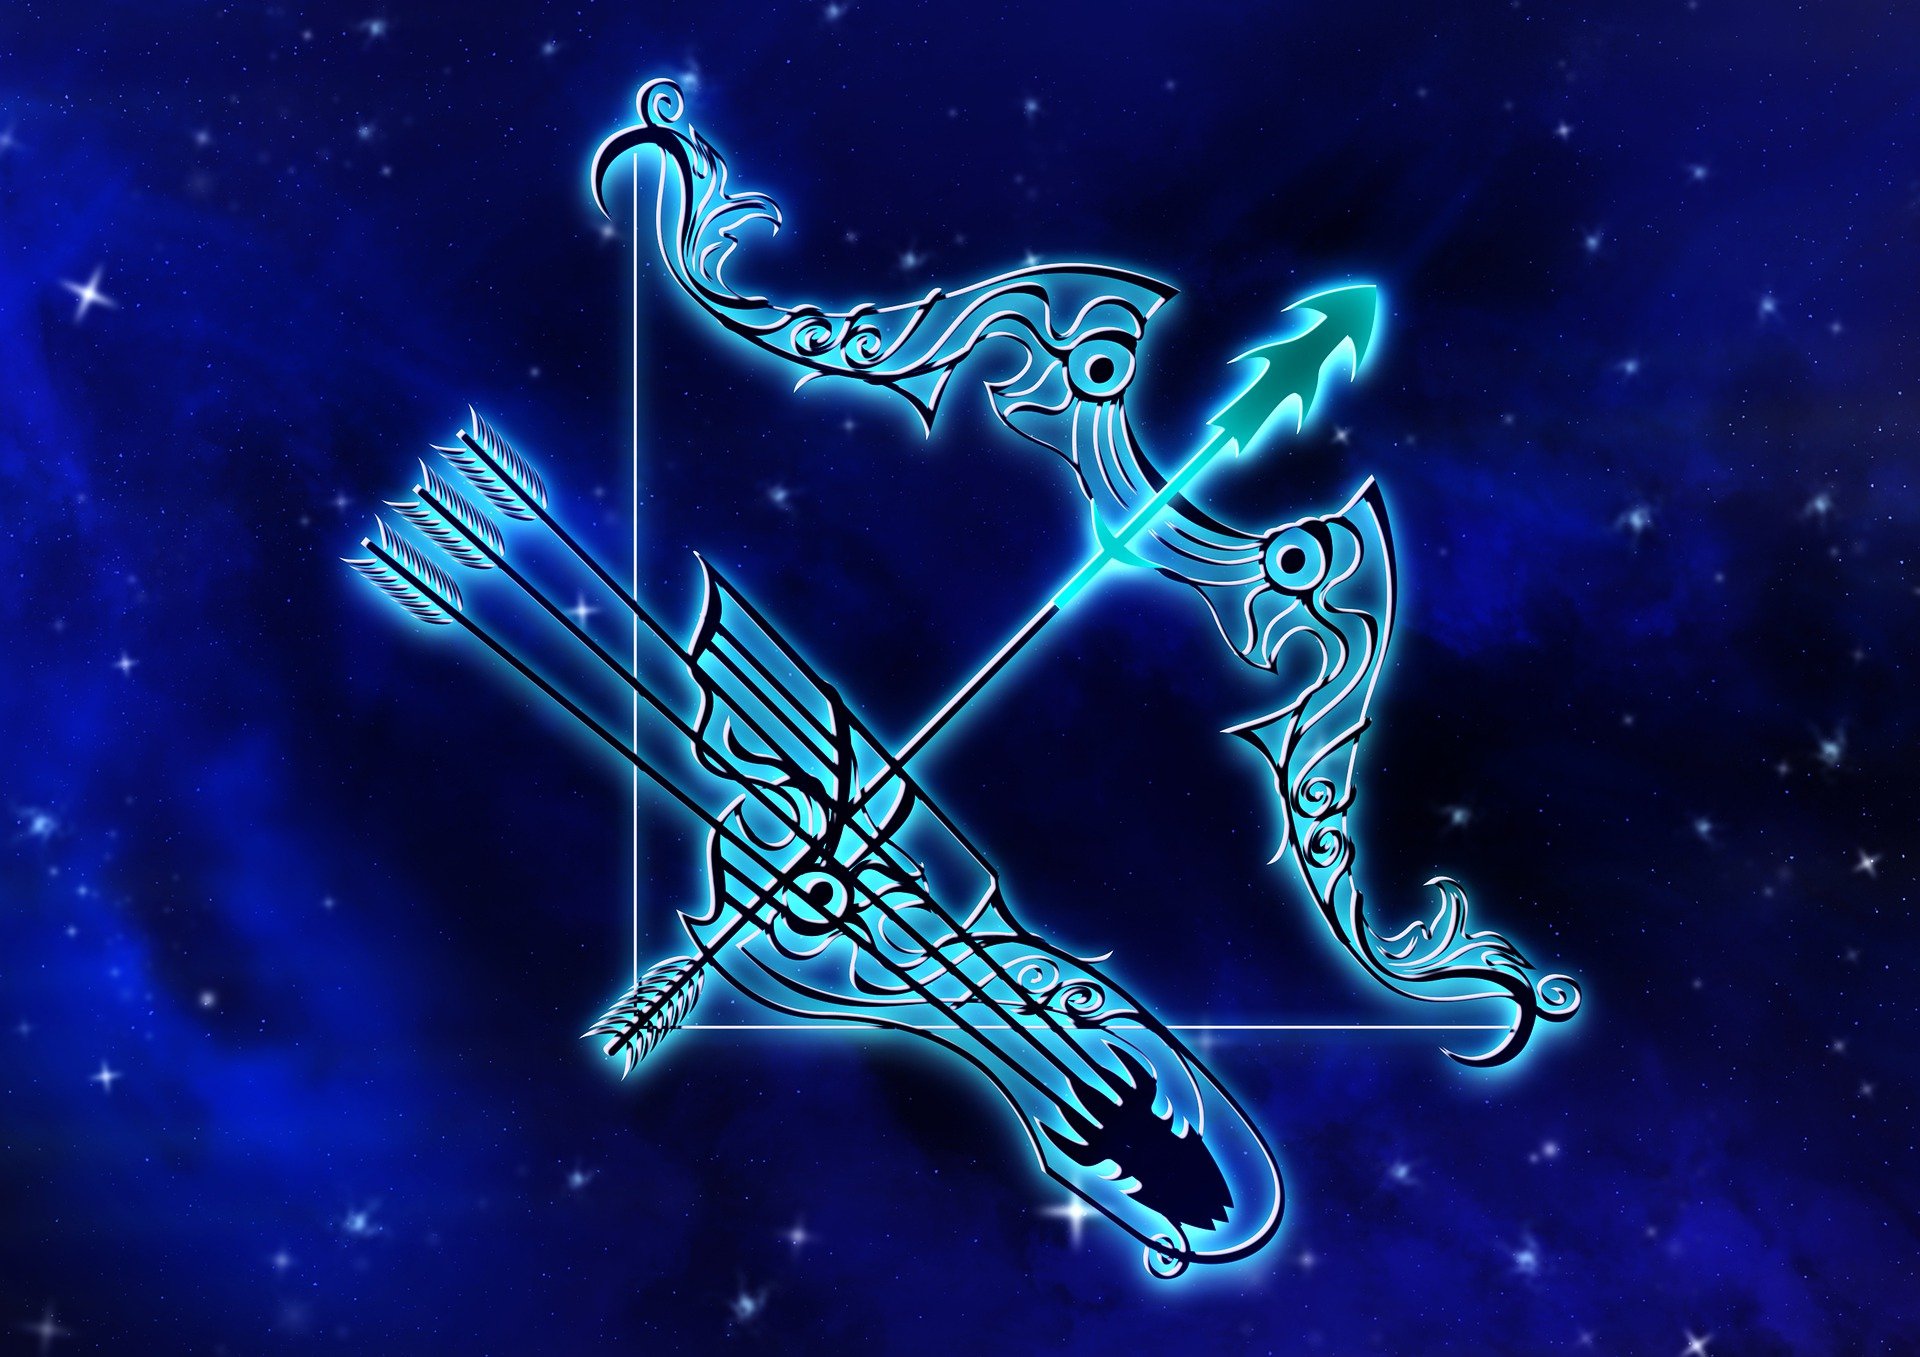 Pictured - A depiction of a Sagittarius star sign | Source: Pixabay 